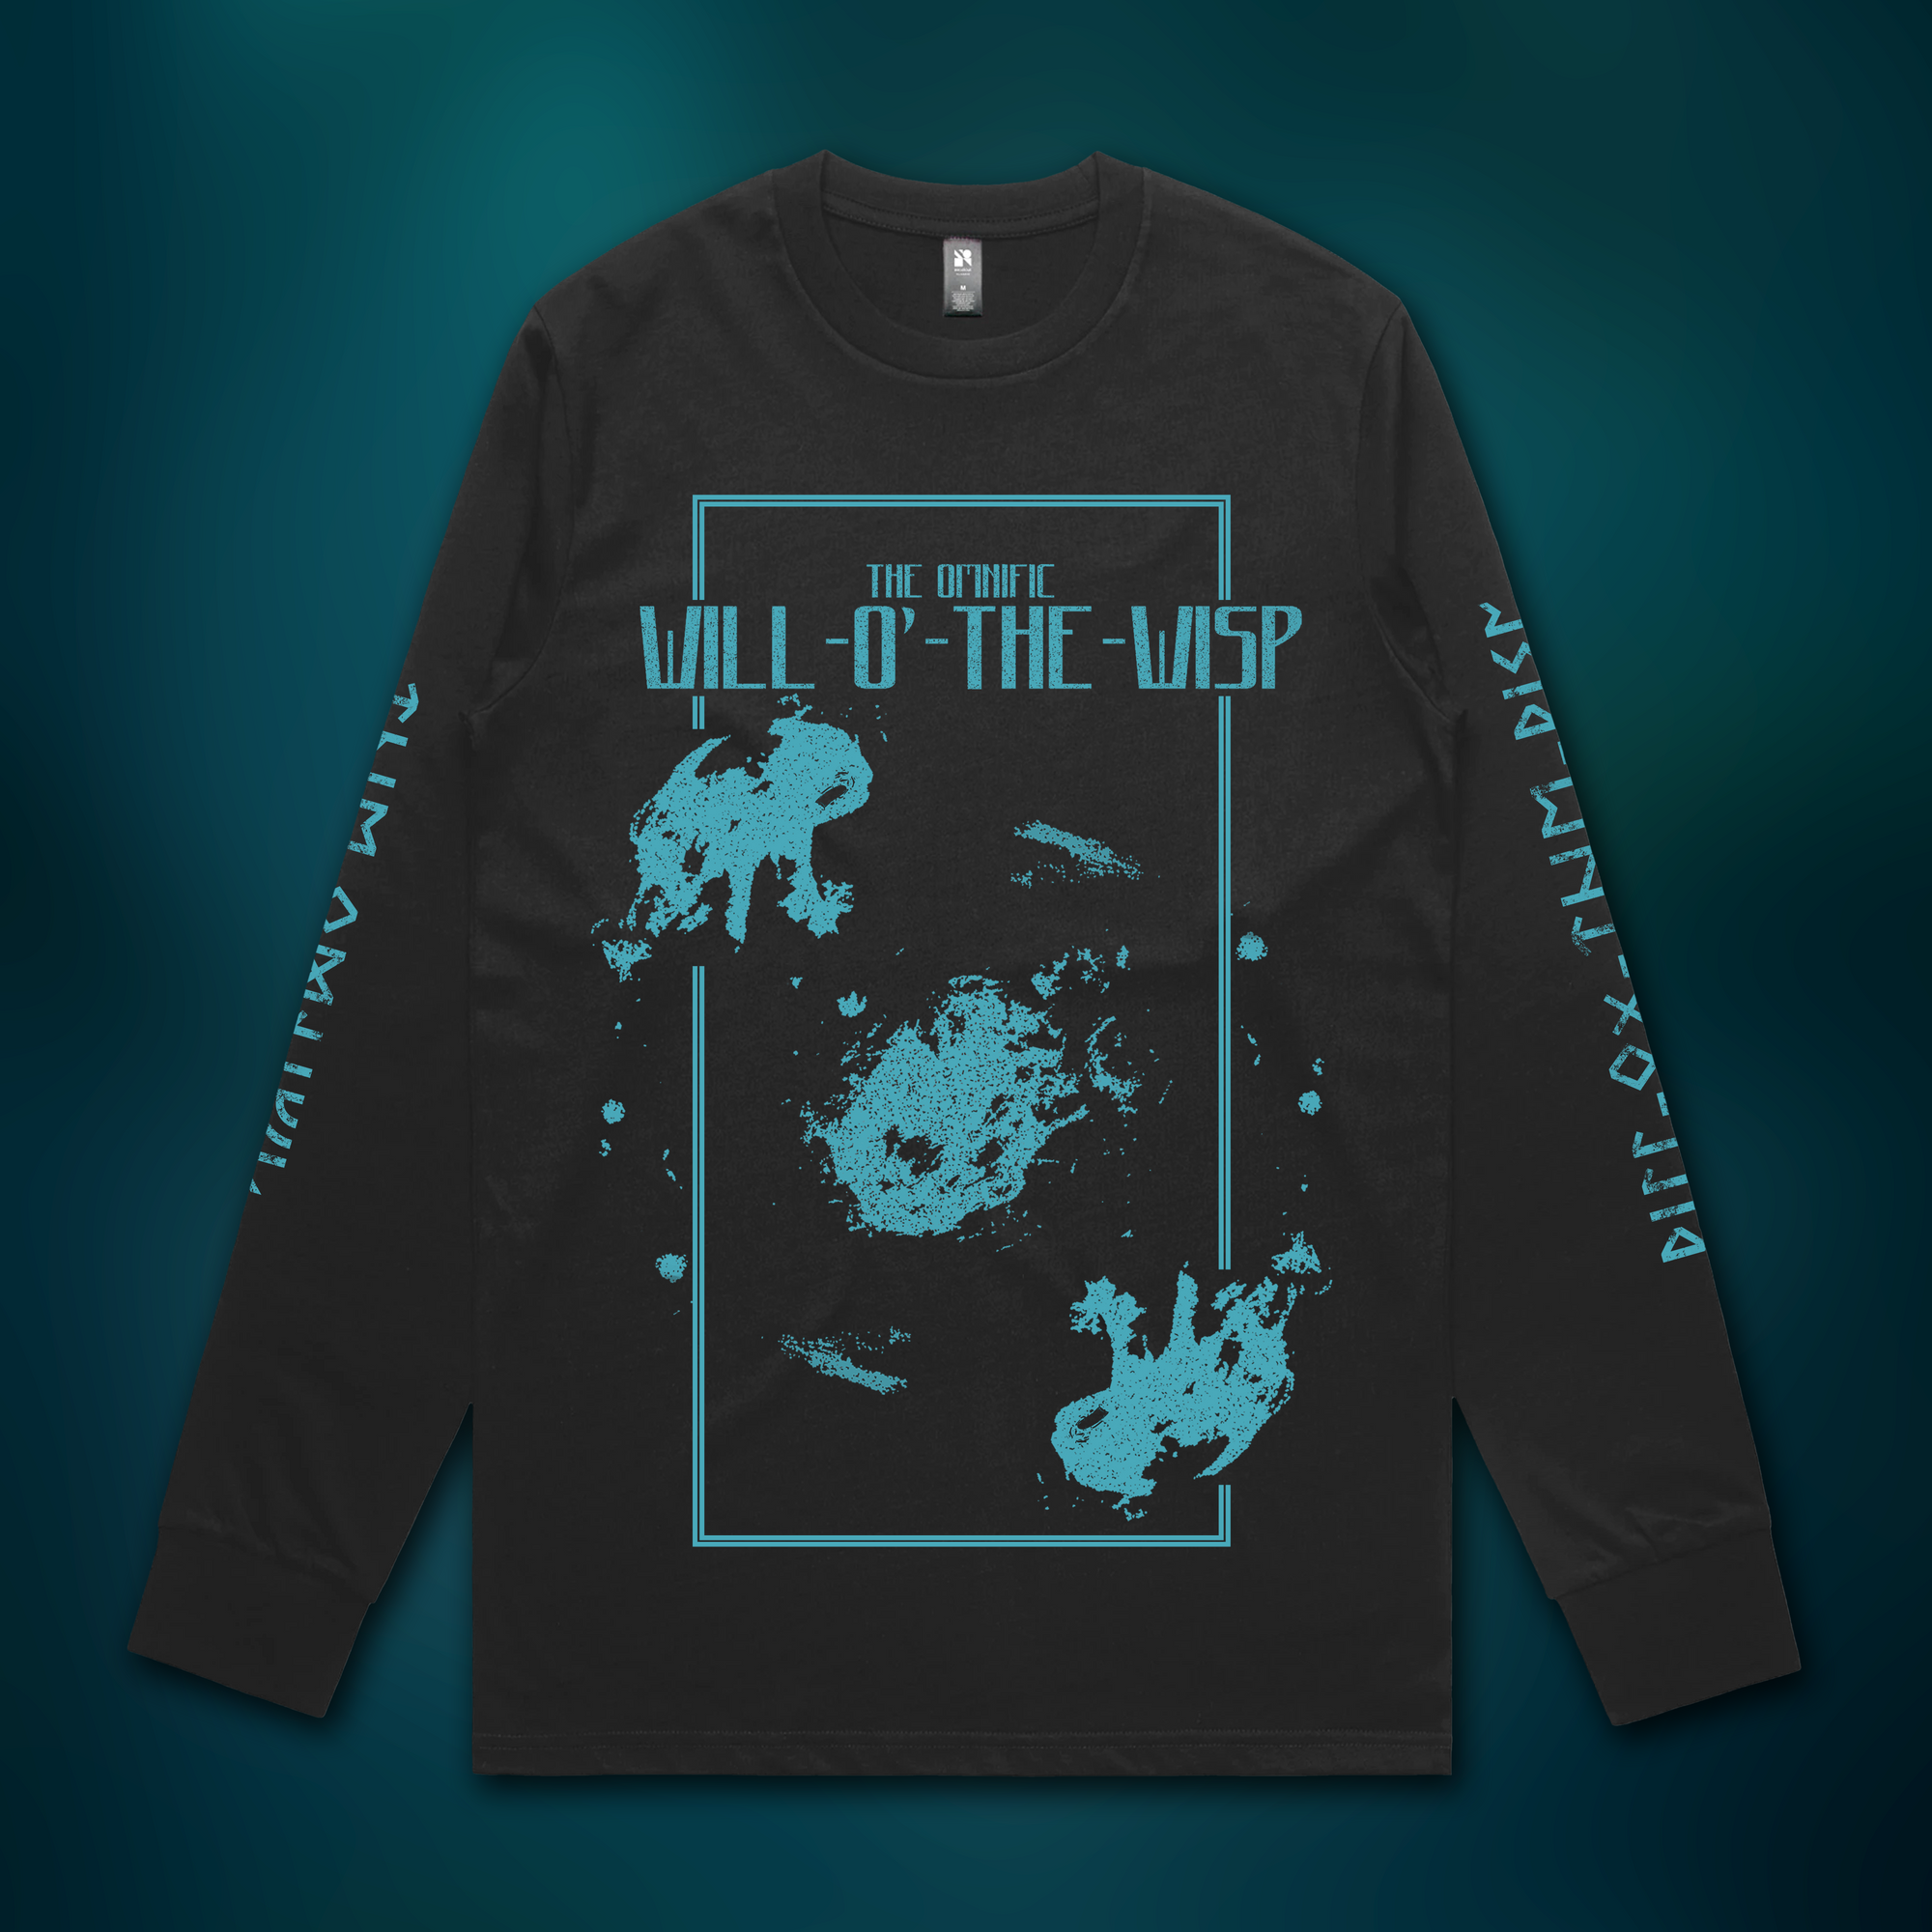 THE OMNIFIC // THE LAW OF AUGMENTING RETURNS - WILL-O'-THE-WISP LONG SLEEVE (BLACK)